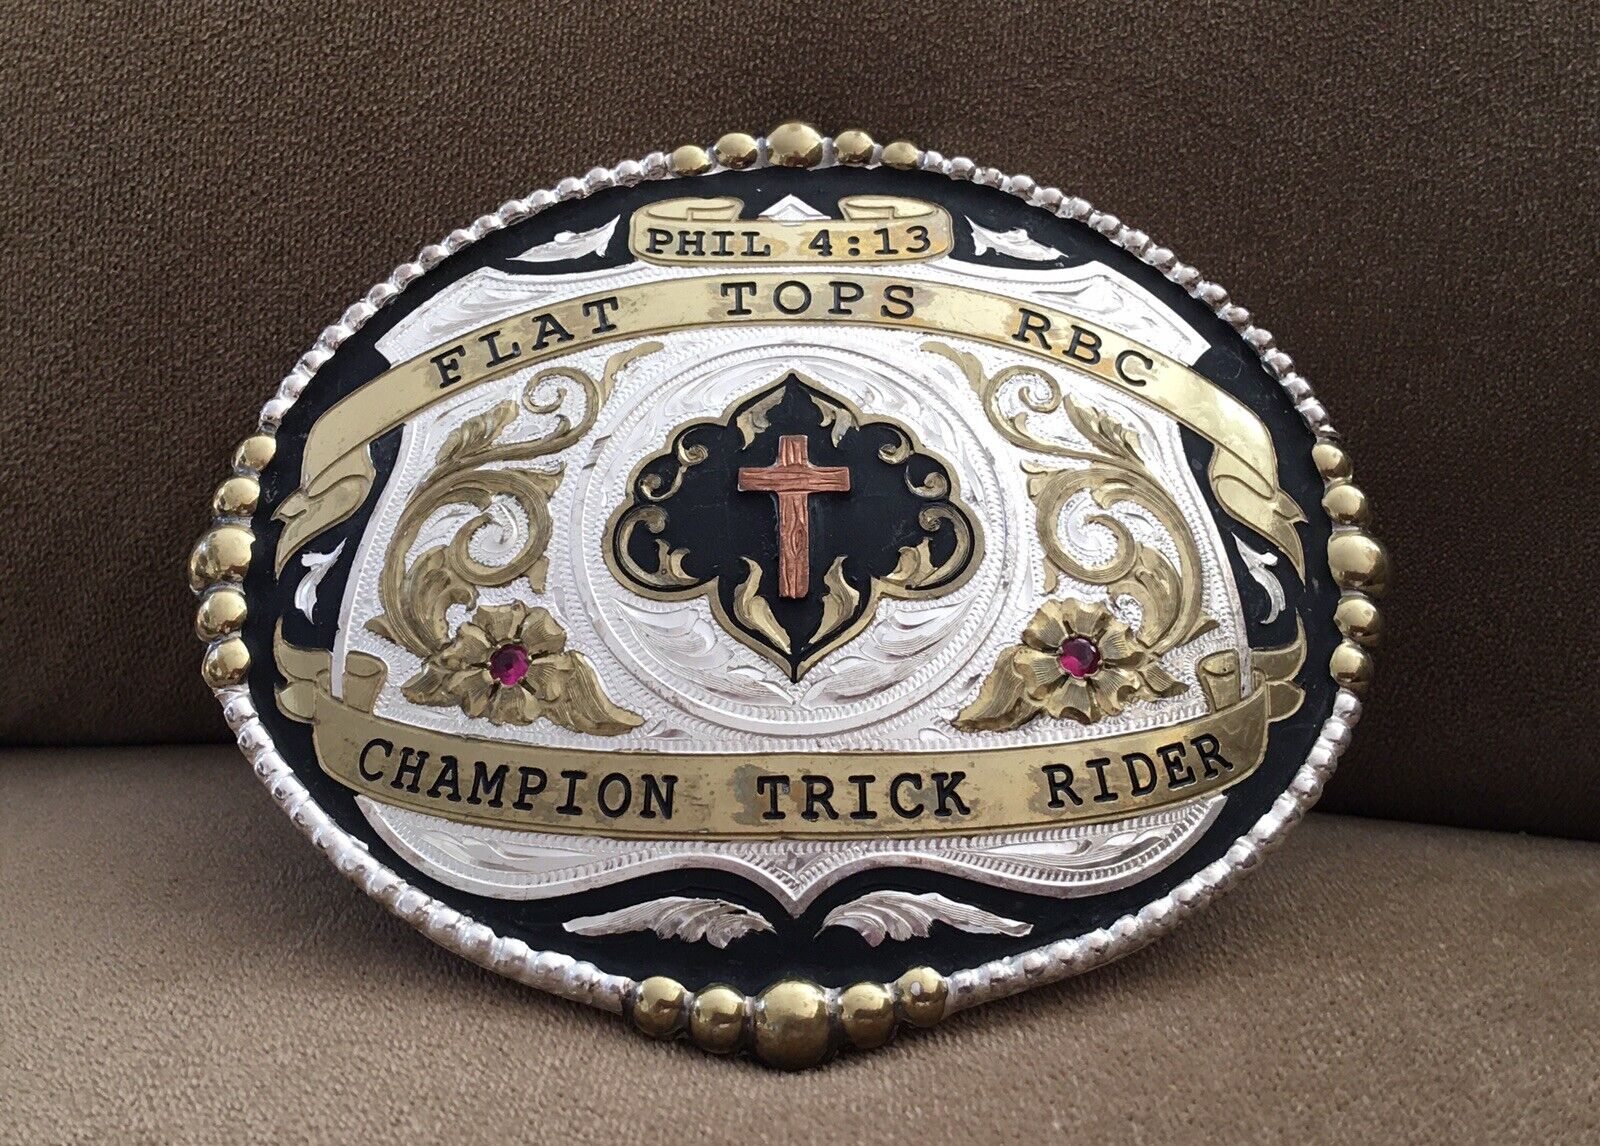 PHIL 4:13 THROUGH HIM WHO GIVES ME STRENGTH...CHRIST CHAMPION TROPHY BELT BUCKLE